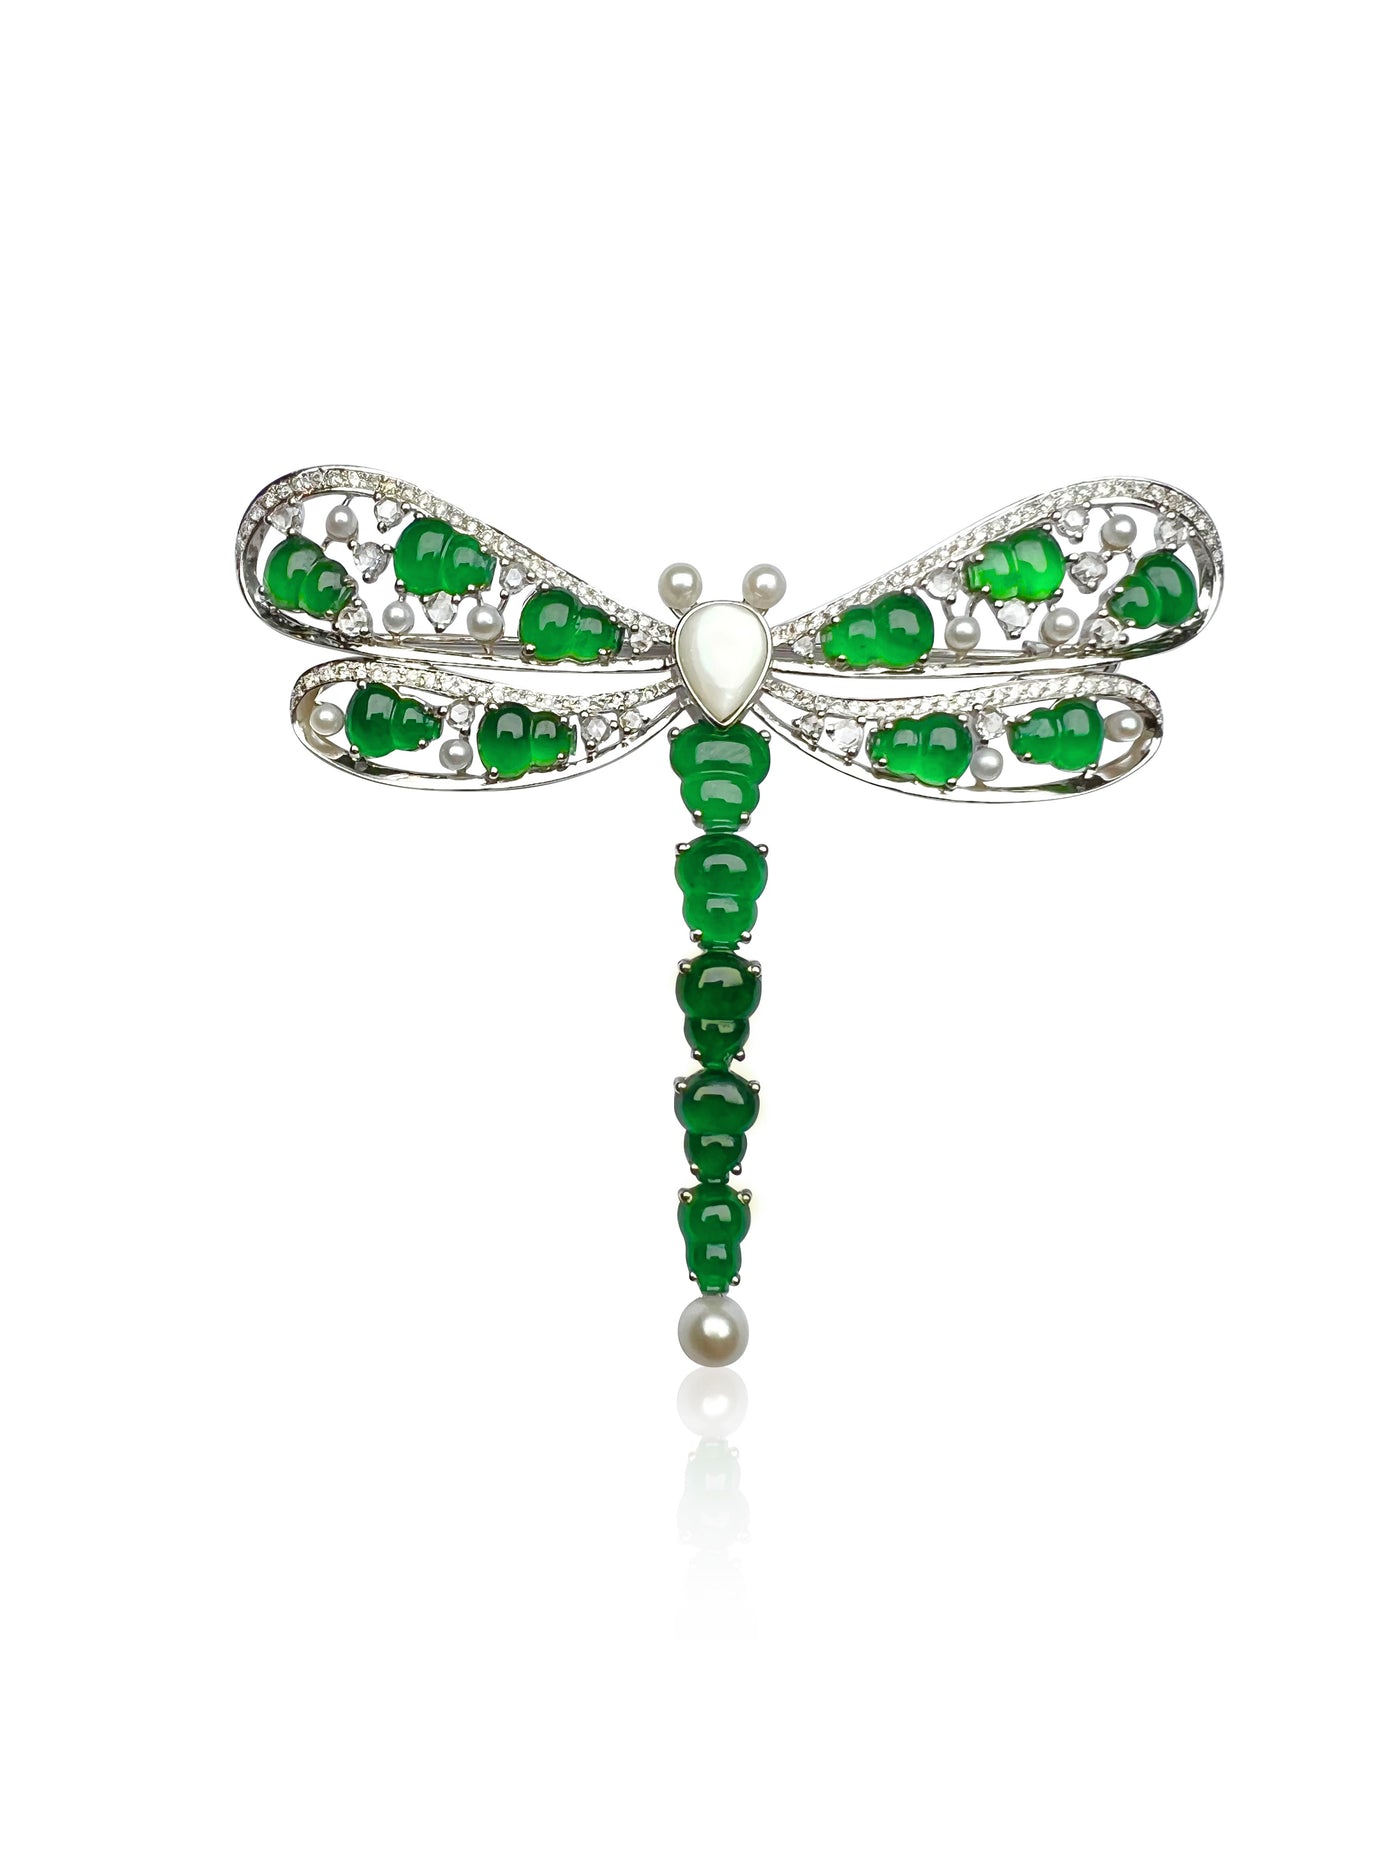 Dragonfly Jadeite Brooch in 18K white gold with diamonds and mother of pearl